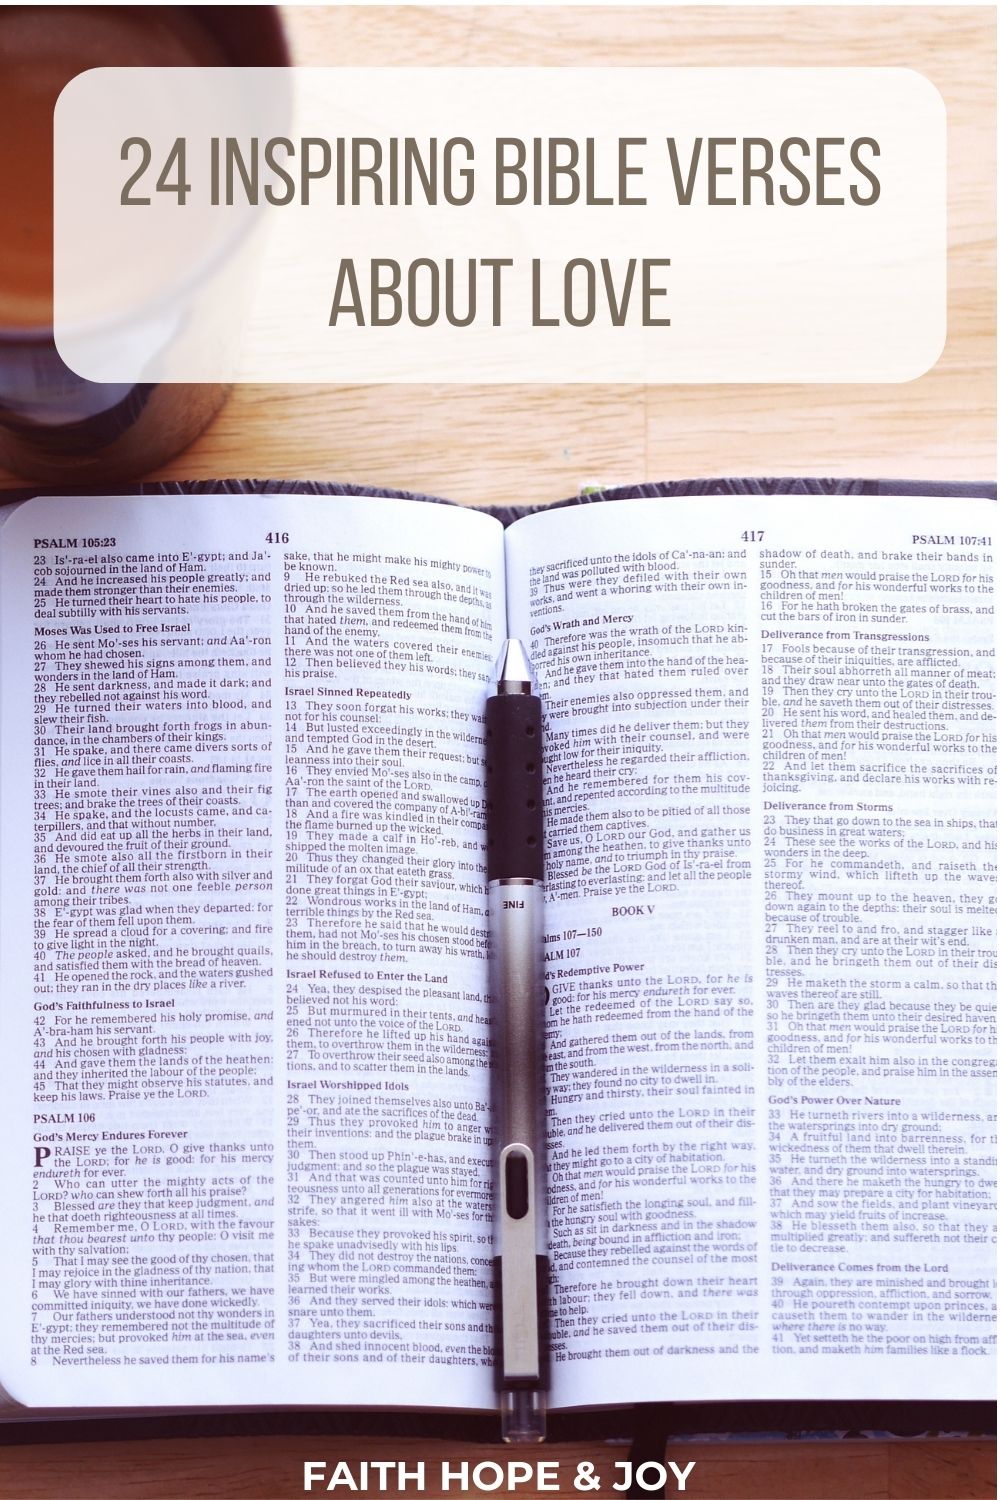 What does the Bible say about love? Check out these 24 Bible verses on love.